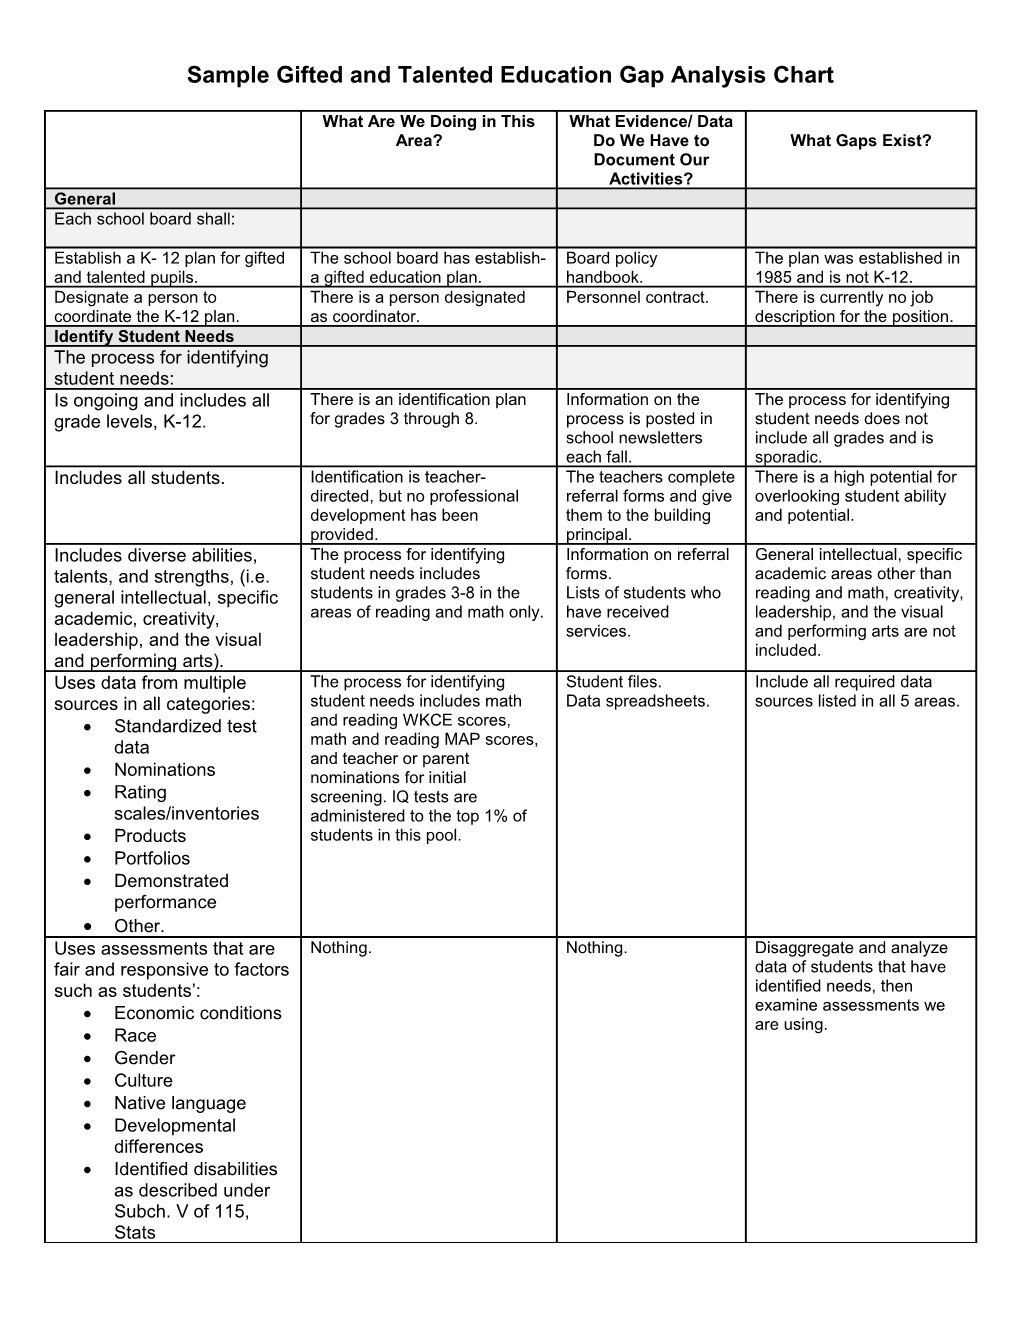 Sample Gifted and Talented Education Gap Analysis Chart